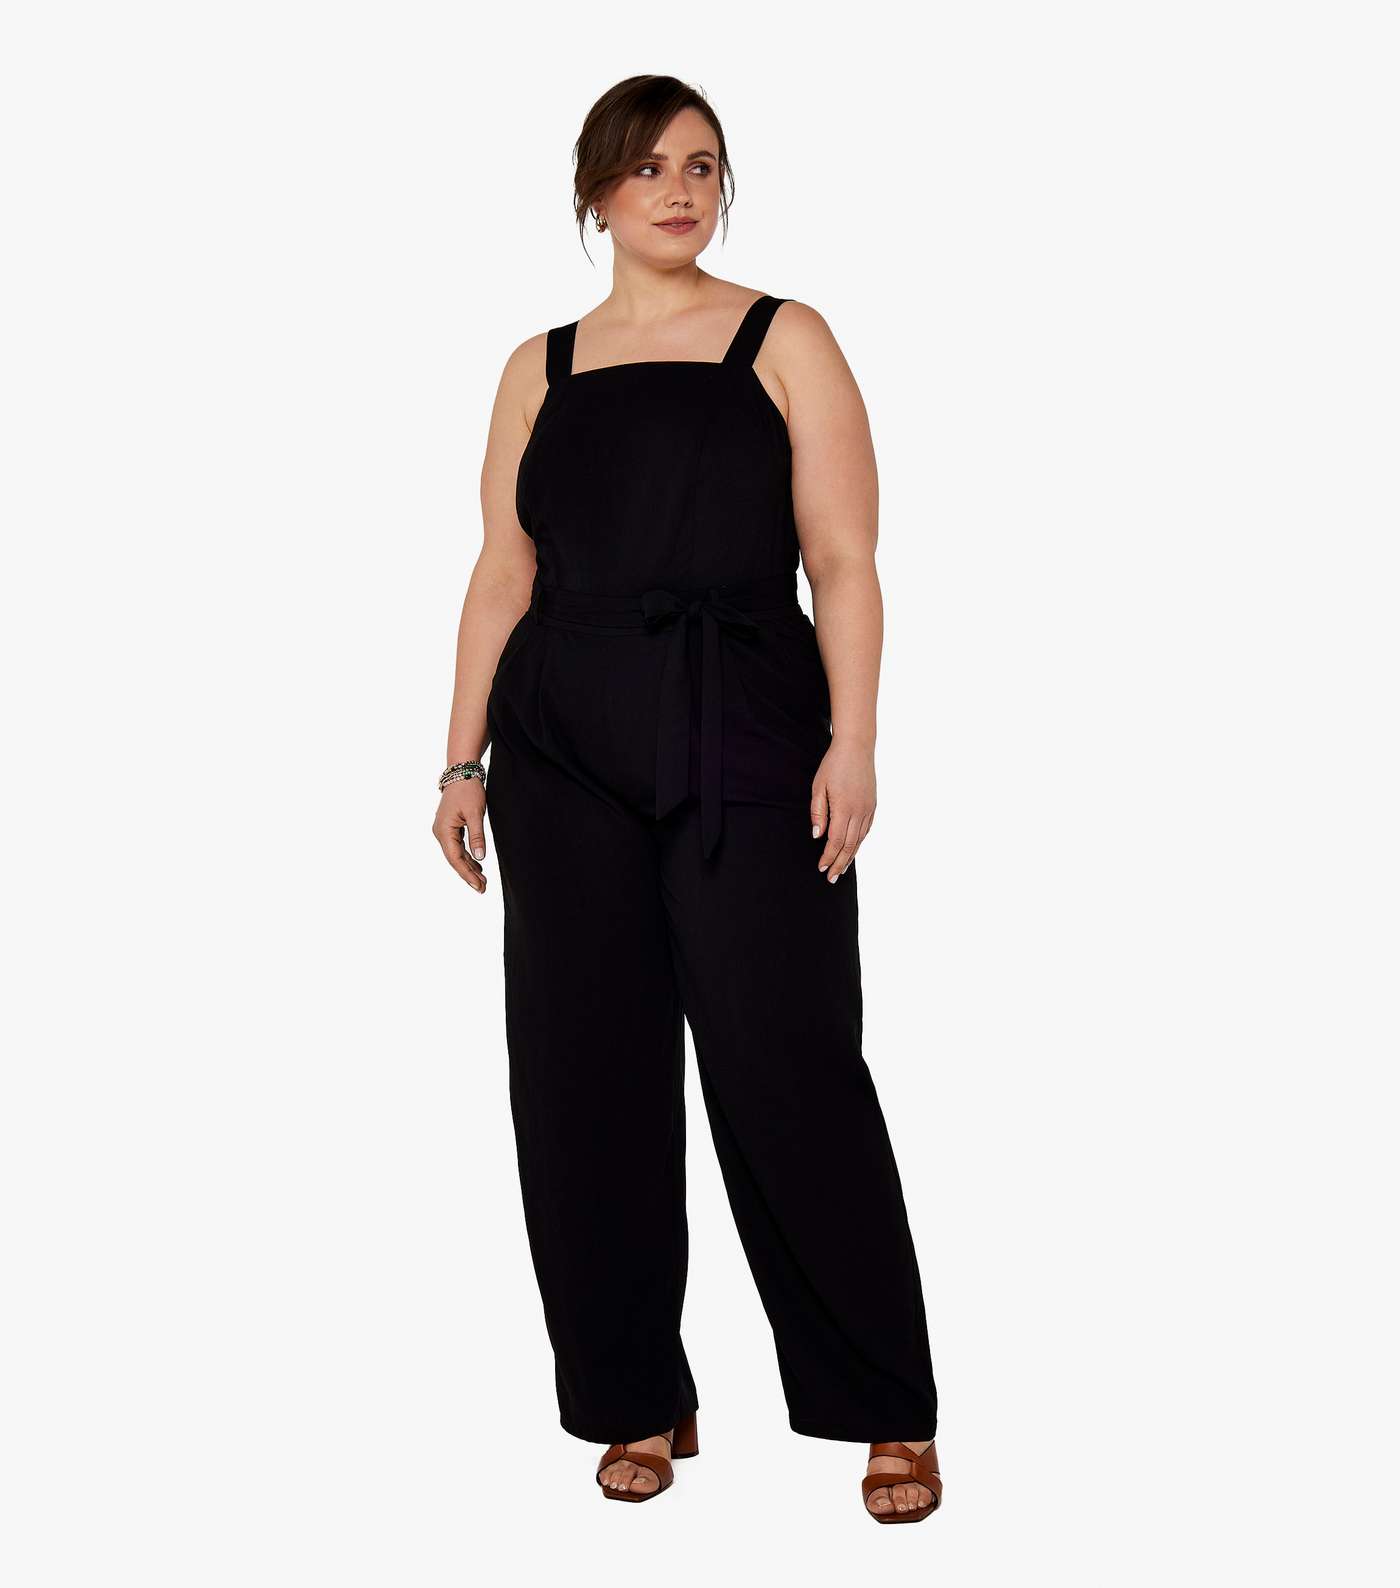 Apricot Curves Black Strappy Dungaree Jumpsuit Image 2